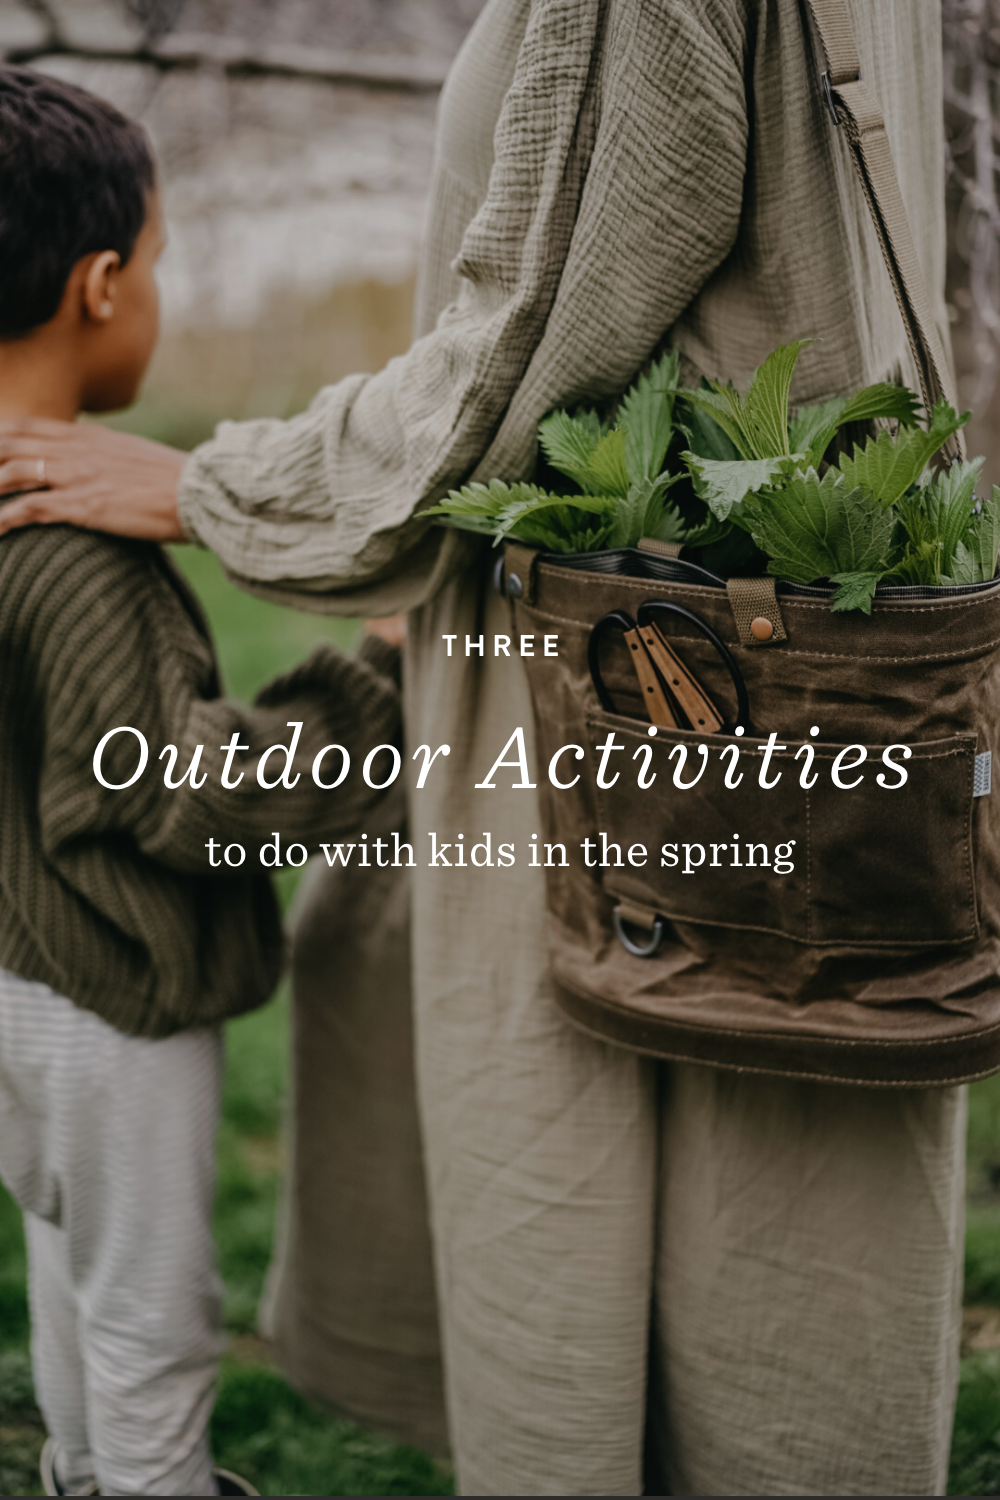 THREE OUTDOOR ACTIVITIES TO DO WITH KIDS IN THE SPRING